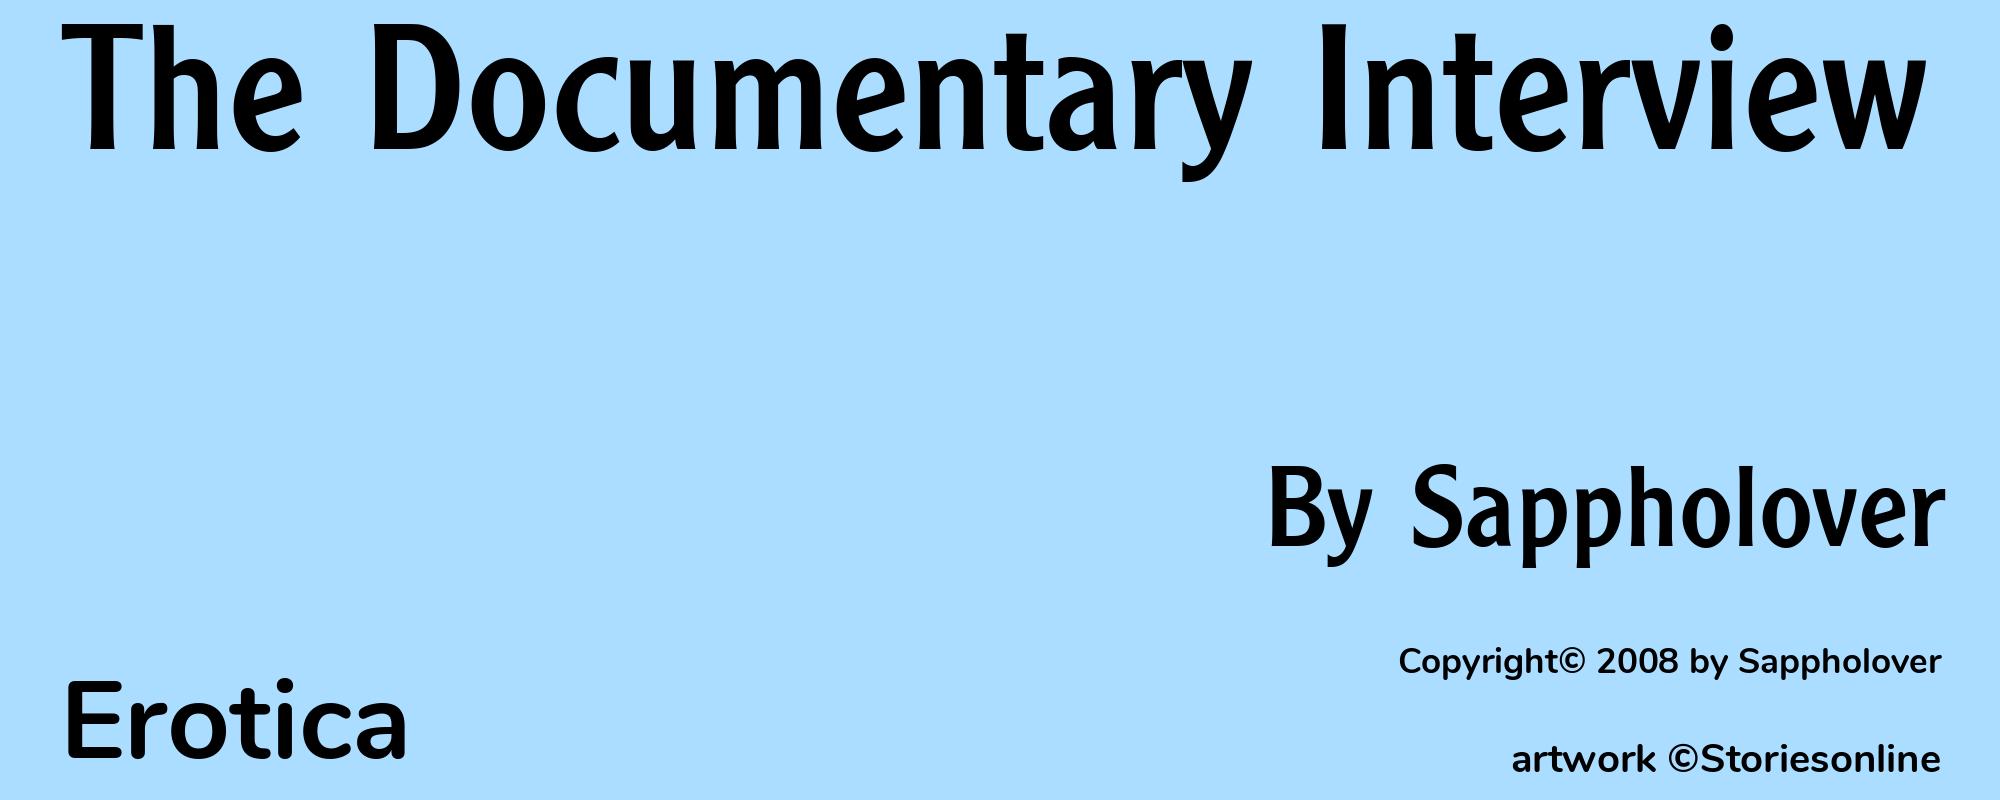 The Documentary Interview - Cover